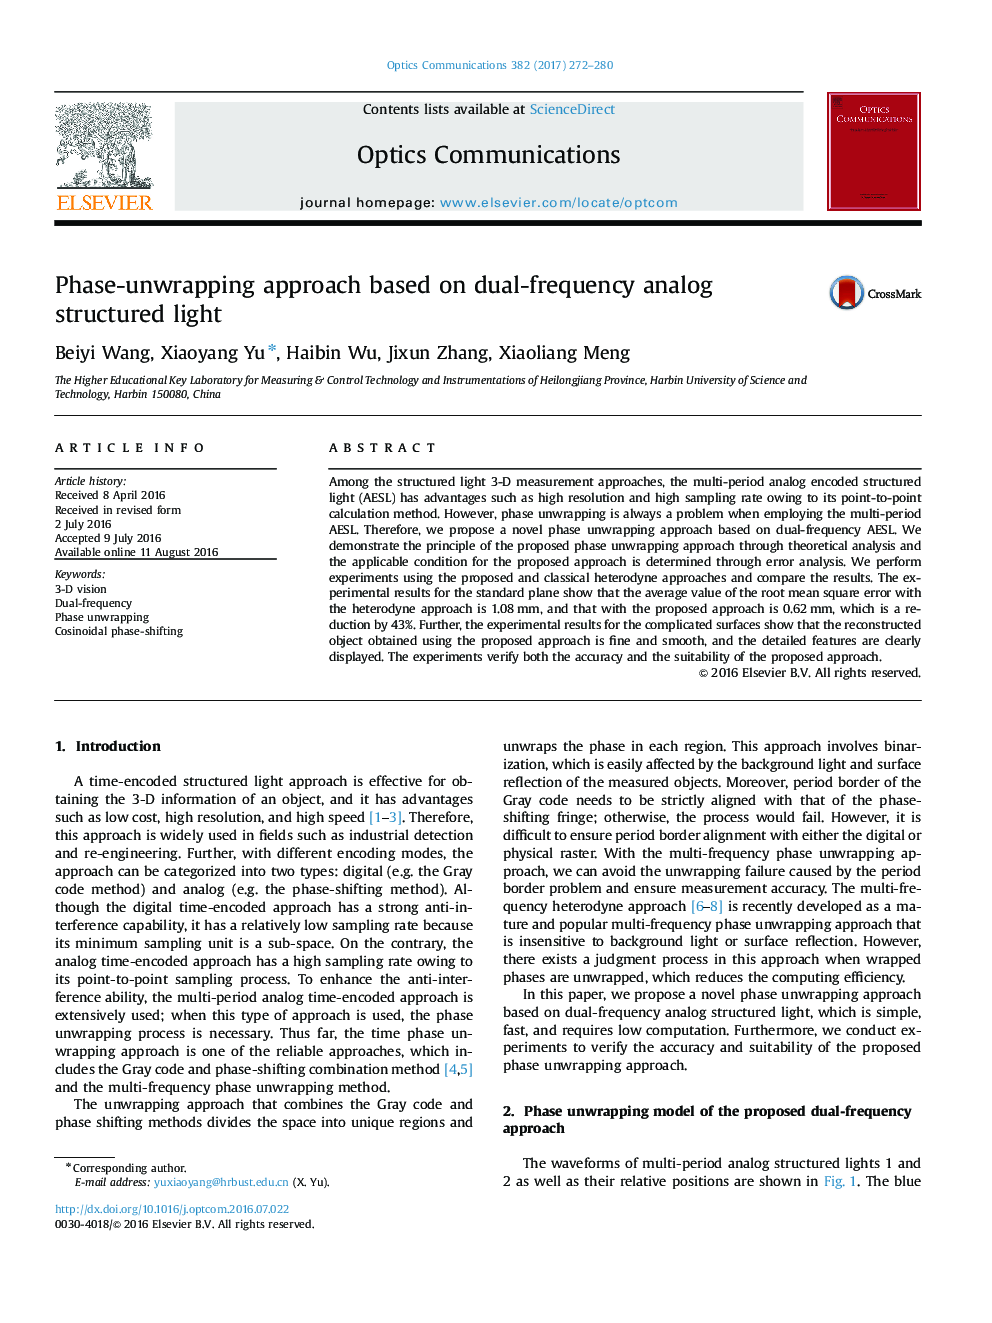 Phase-unwrapping approach based on dual-frequency analog structured light